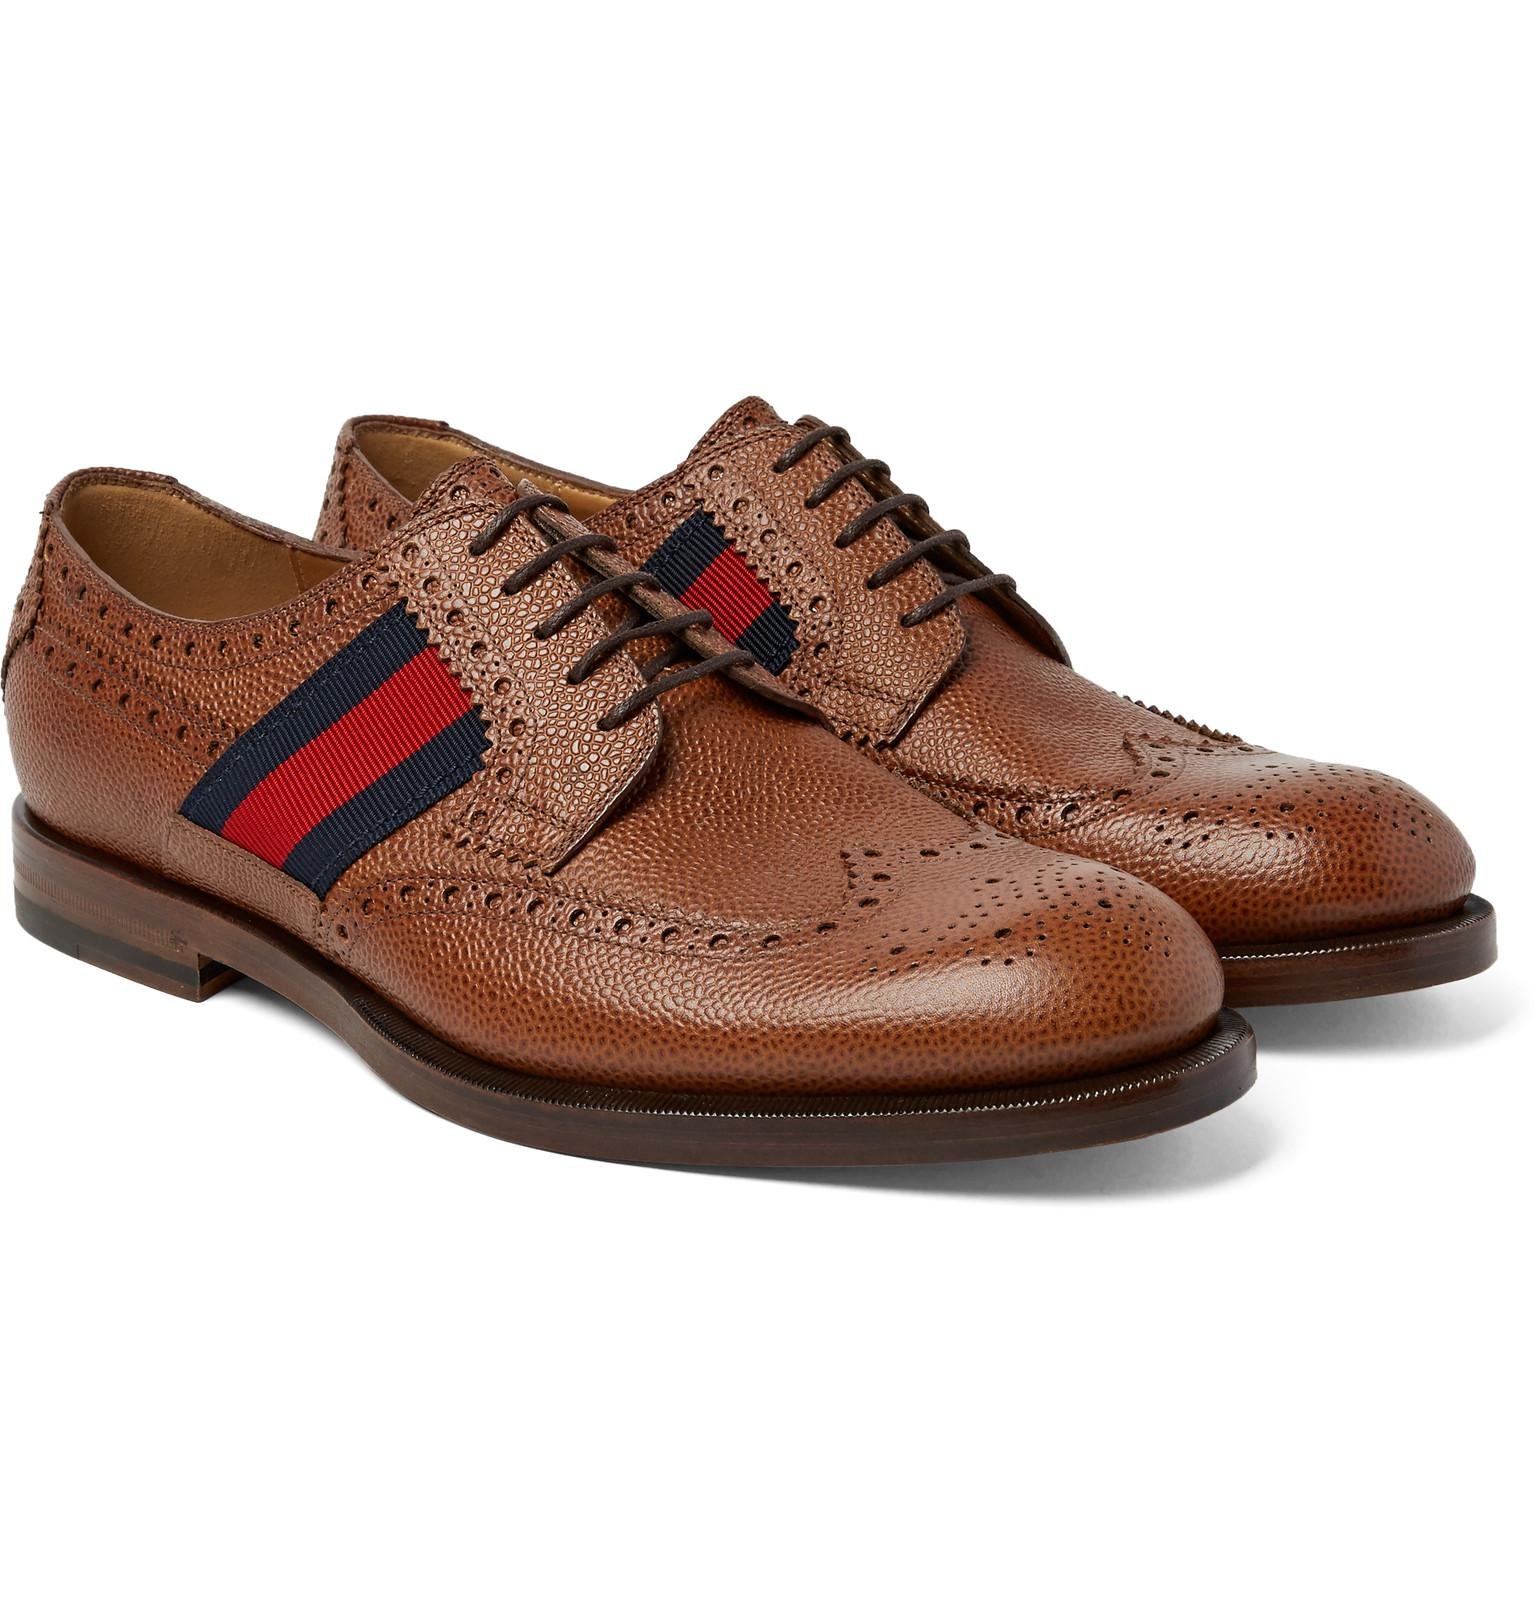 Gucci - Webbing-trimmed Pebble-grain Leather Wingtip Brogues - Tan in Brown  for Men - Lyst